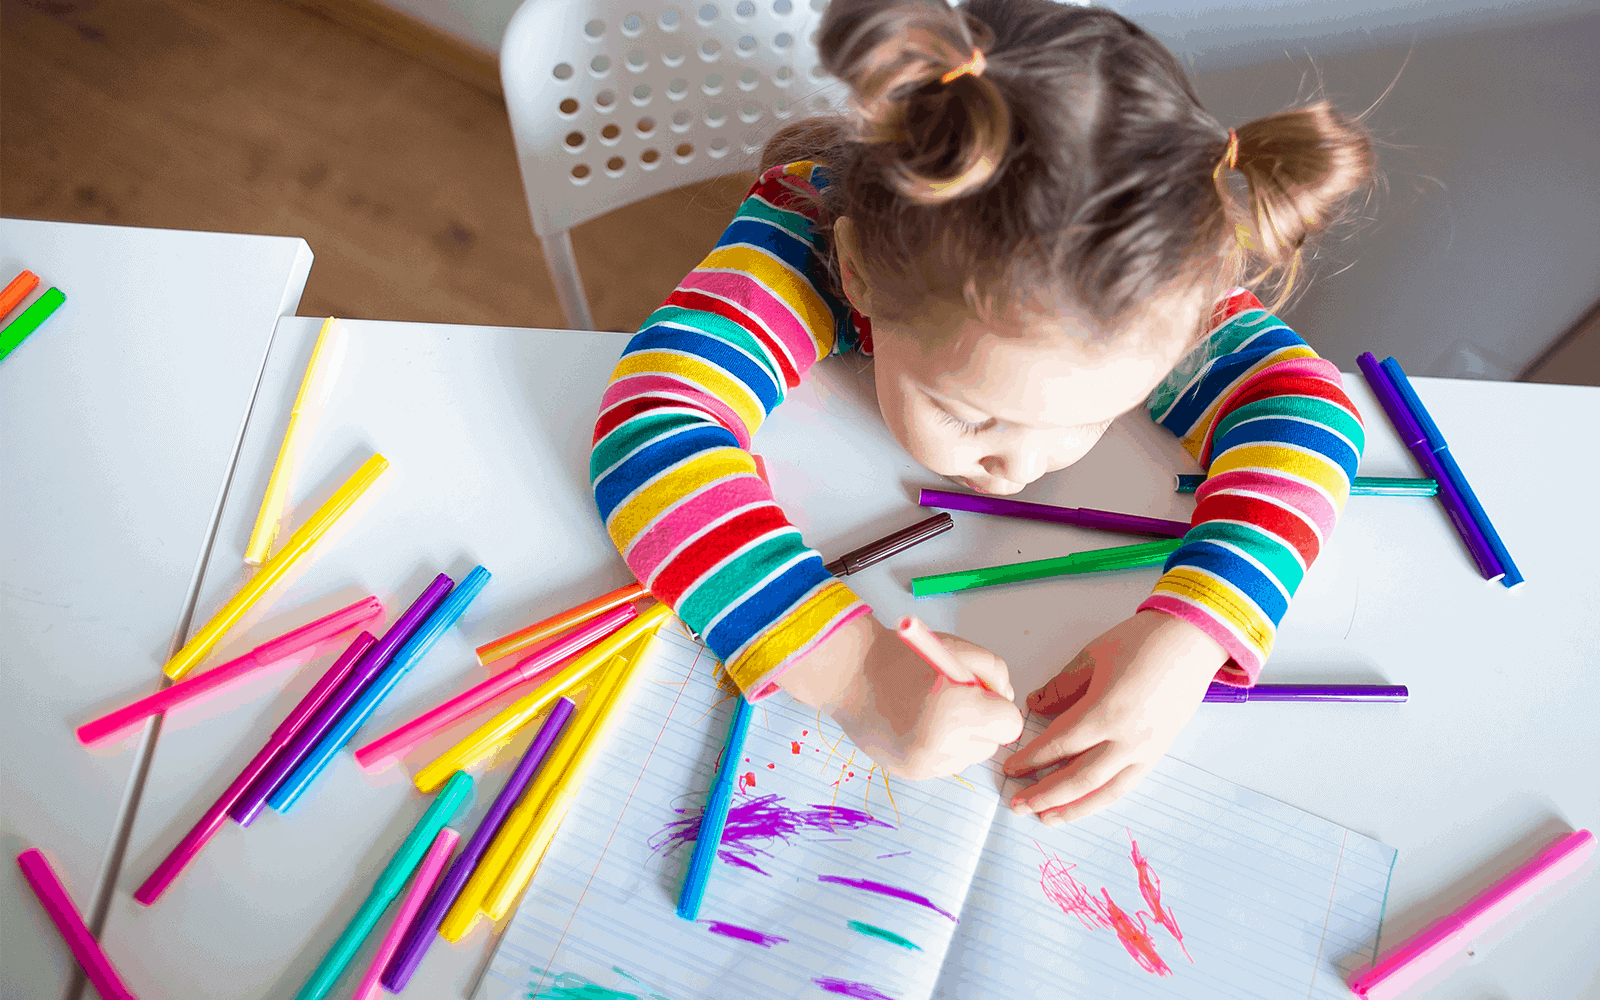 Young child doing an at-home art project